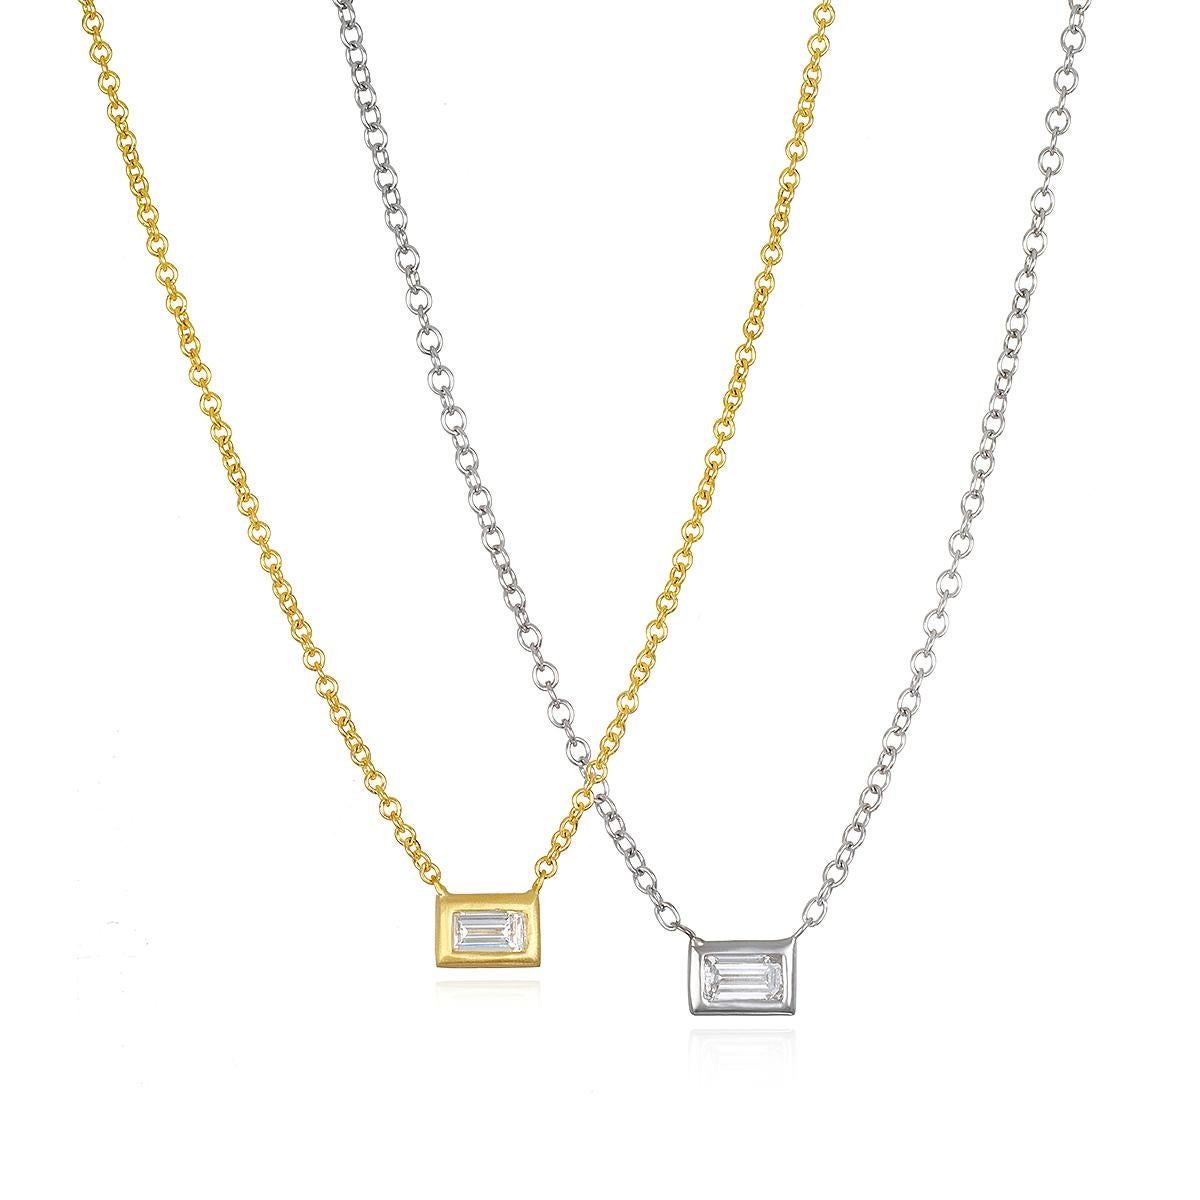 Faye Kim's 18k White Gold Diamond Baguette Drop Necklace with a bezel setting is a simple, classic design.
Whether your style is traditional or contemporary, it's great as a foundation piece or to layer with larger, longer necklaces.
Model